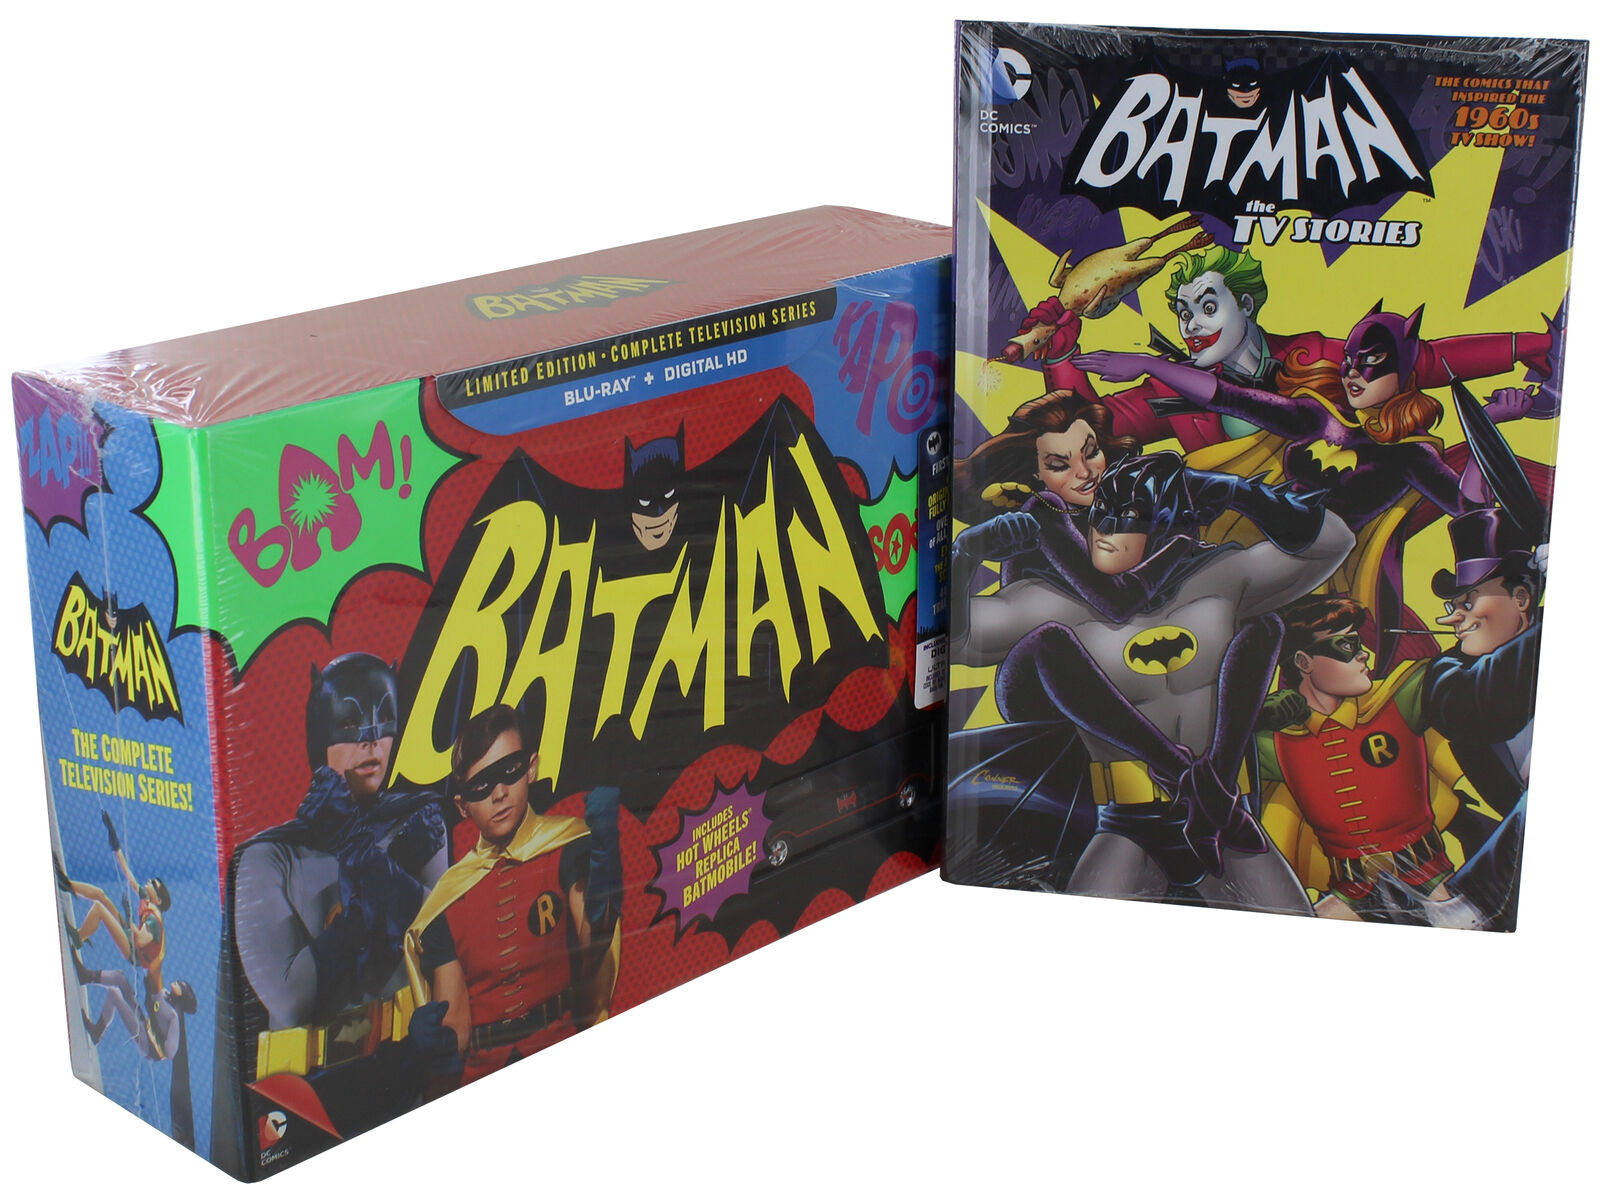 Batman Complete TV Series with Exclusive Limited Edition Blu-Ray & Book Set